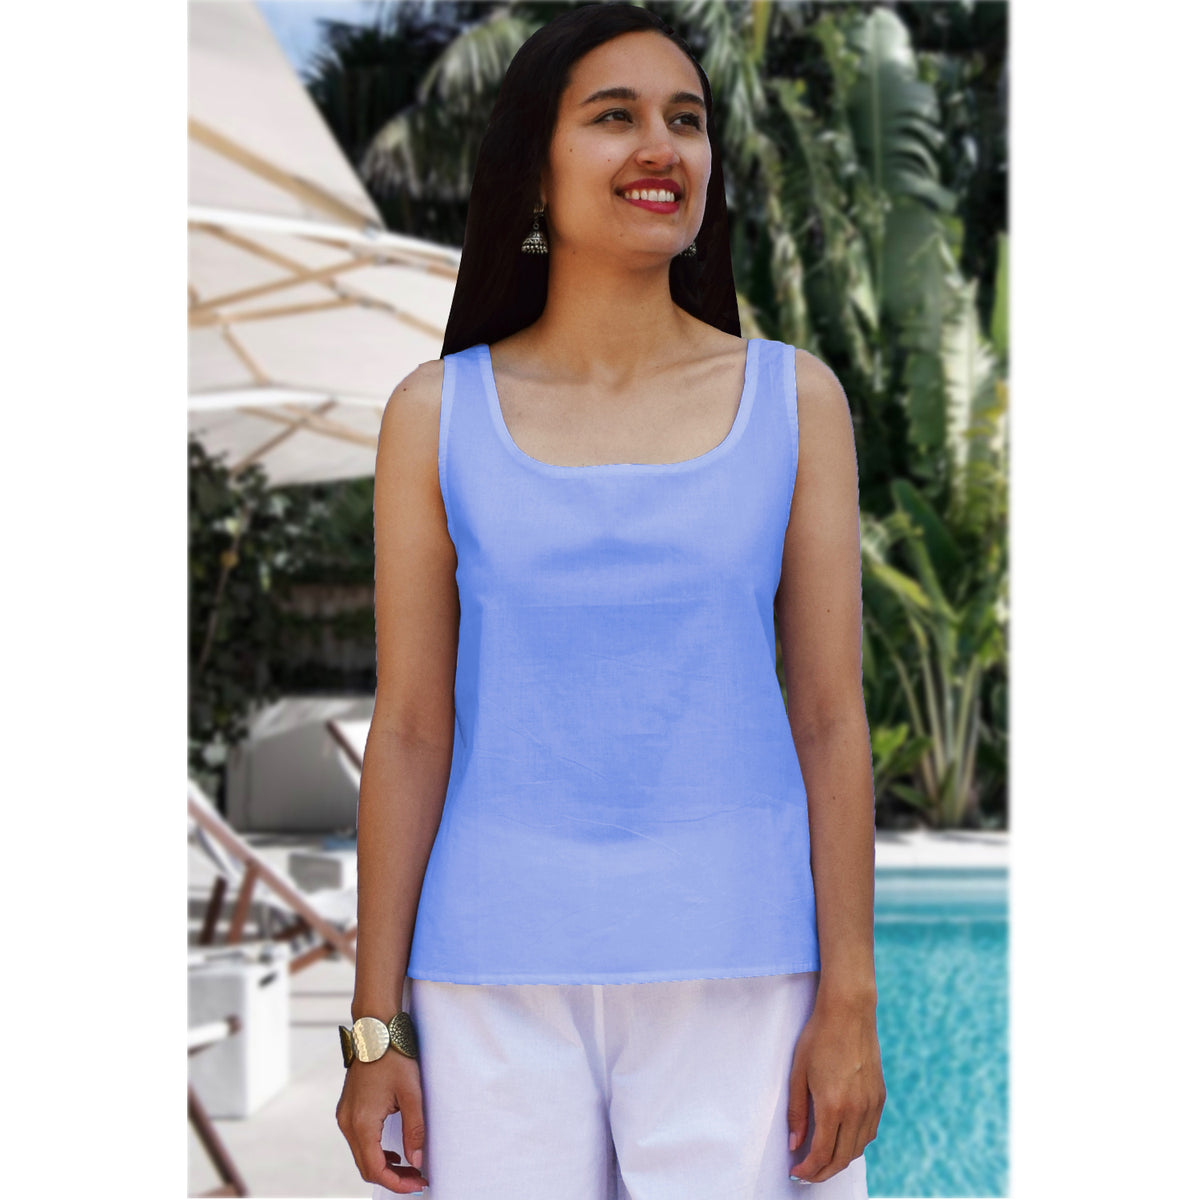 Women's Basic Short Cotton Camisoles ( Additional colors): Made to